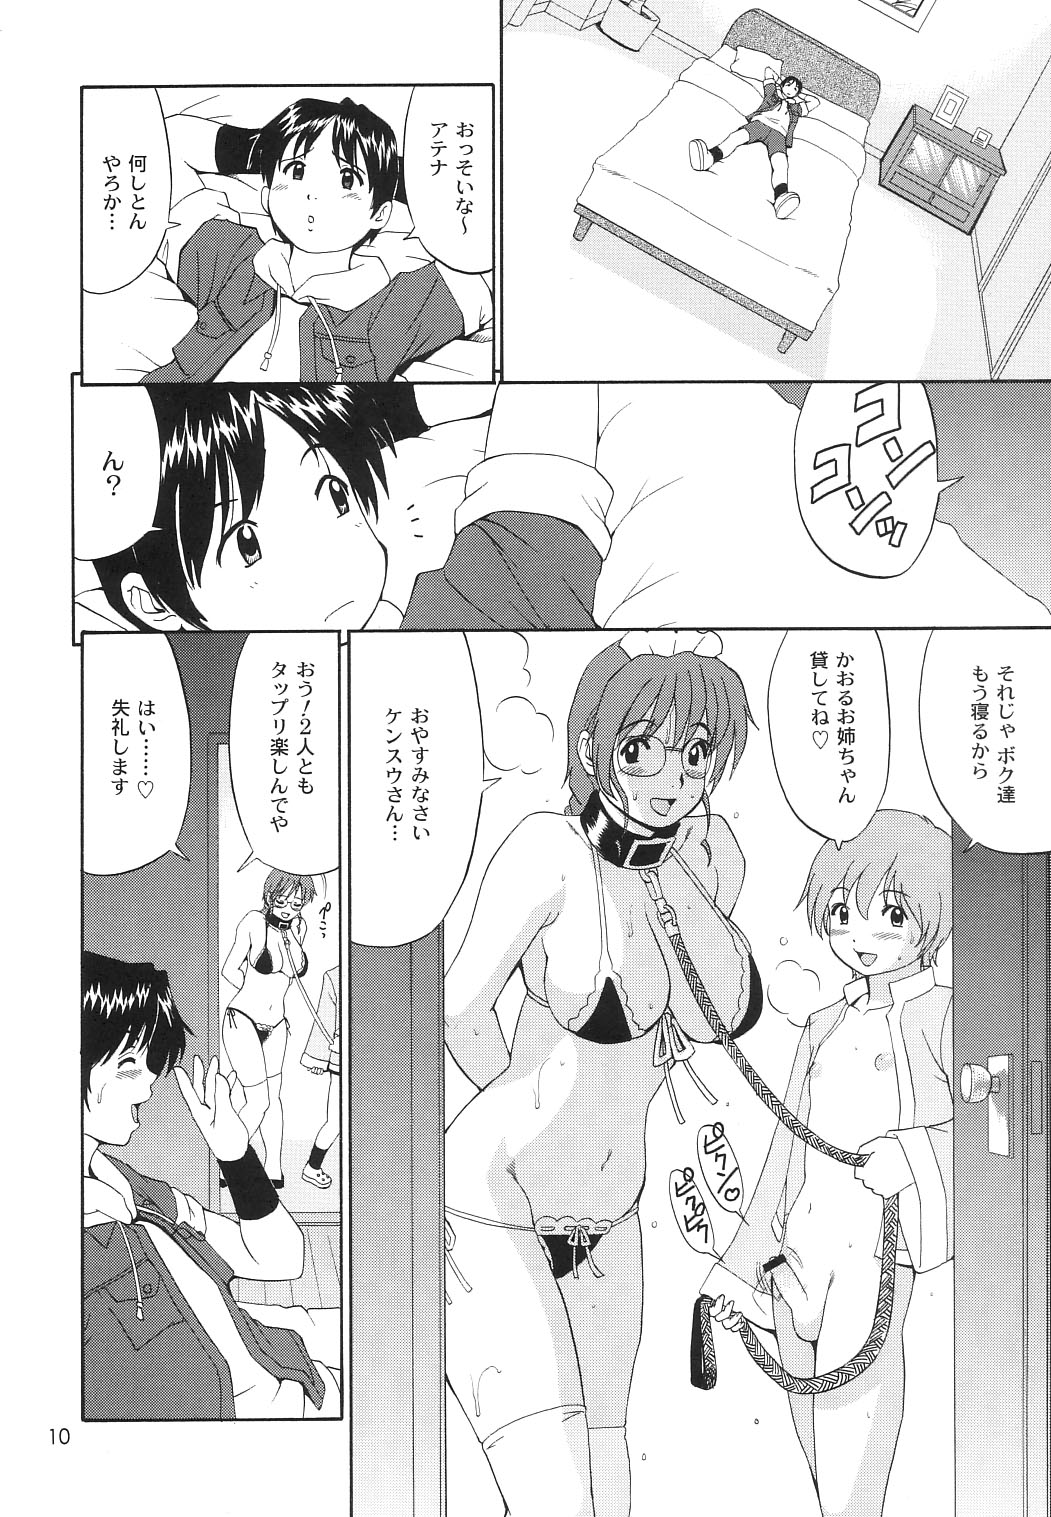 (C65) [Saigado] Athena & Friends SVC -Special Version of Chaos- (King of Fighters) page 9 full